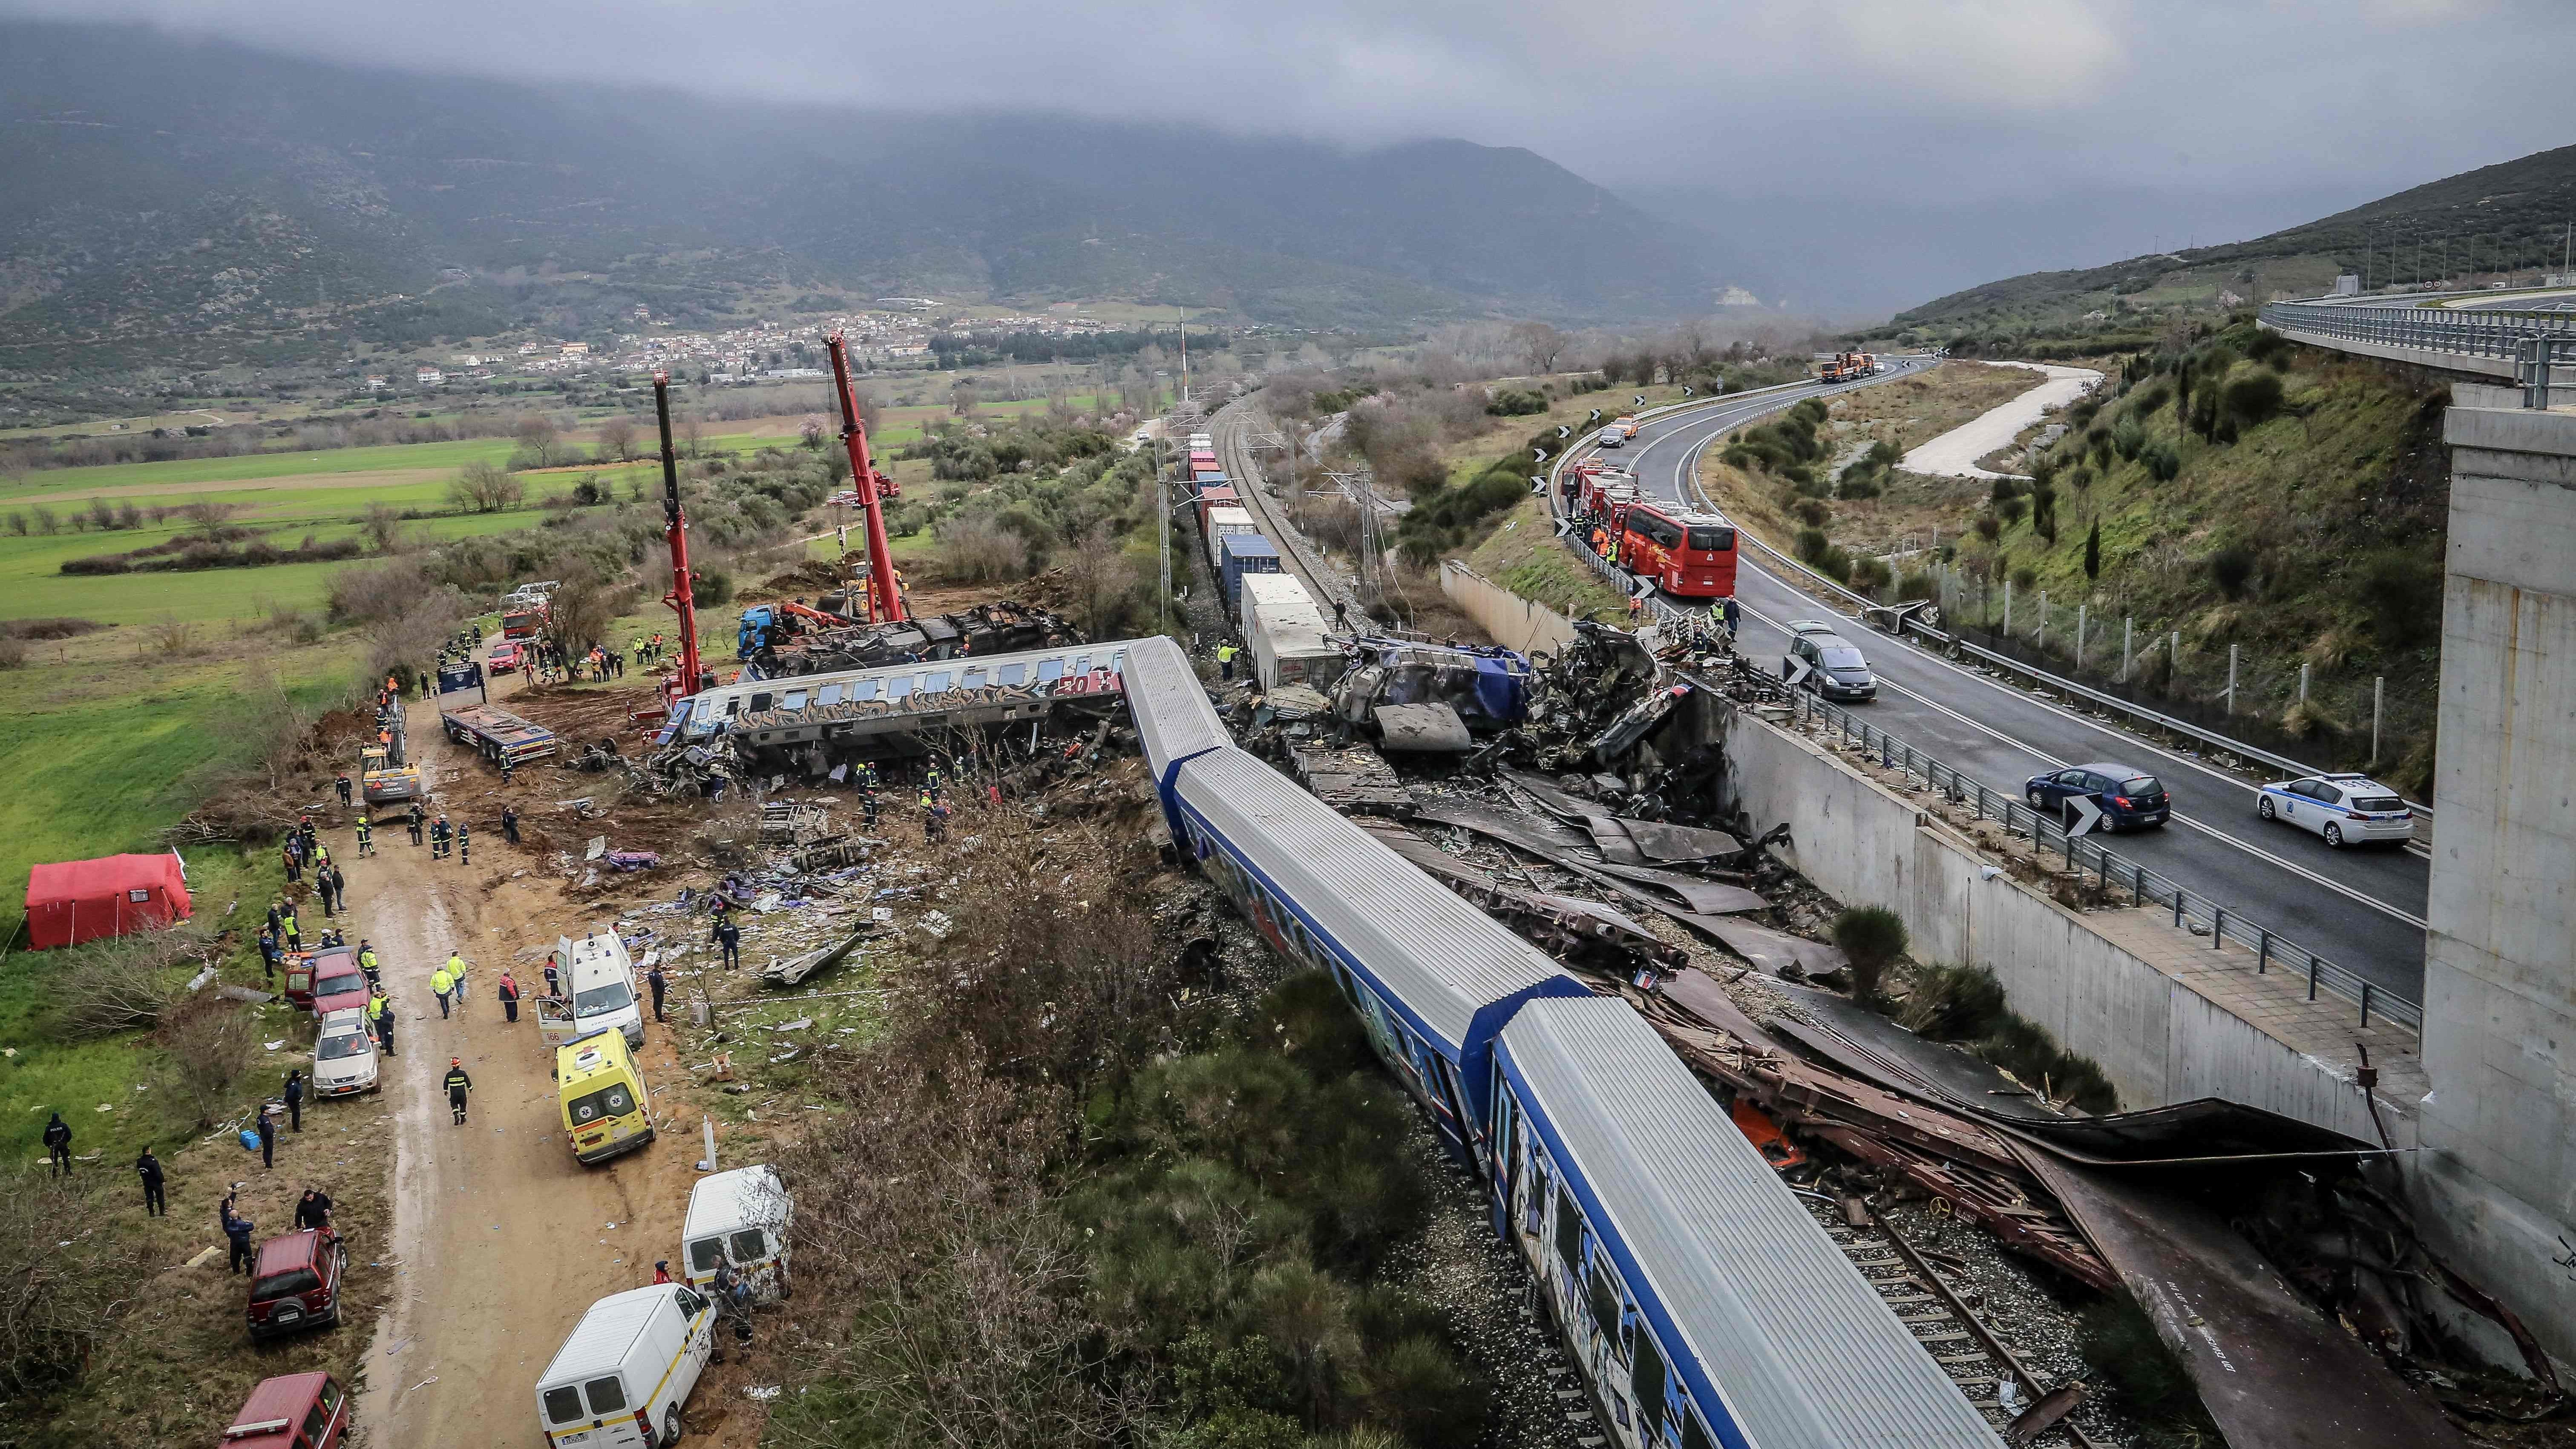 Police and emergency crews search the debris of a crushed wagon after a train accident in the Tempi Valley near Larissa, Greece, March 1, 2023.